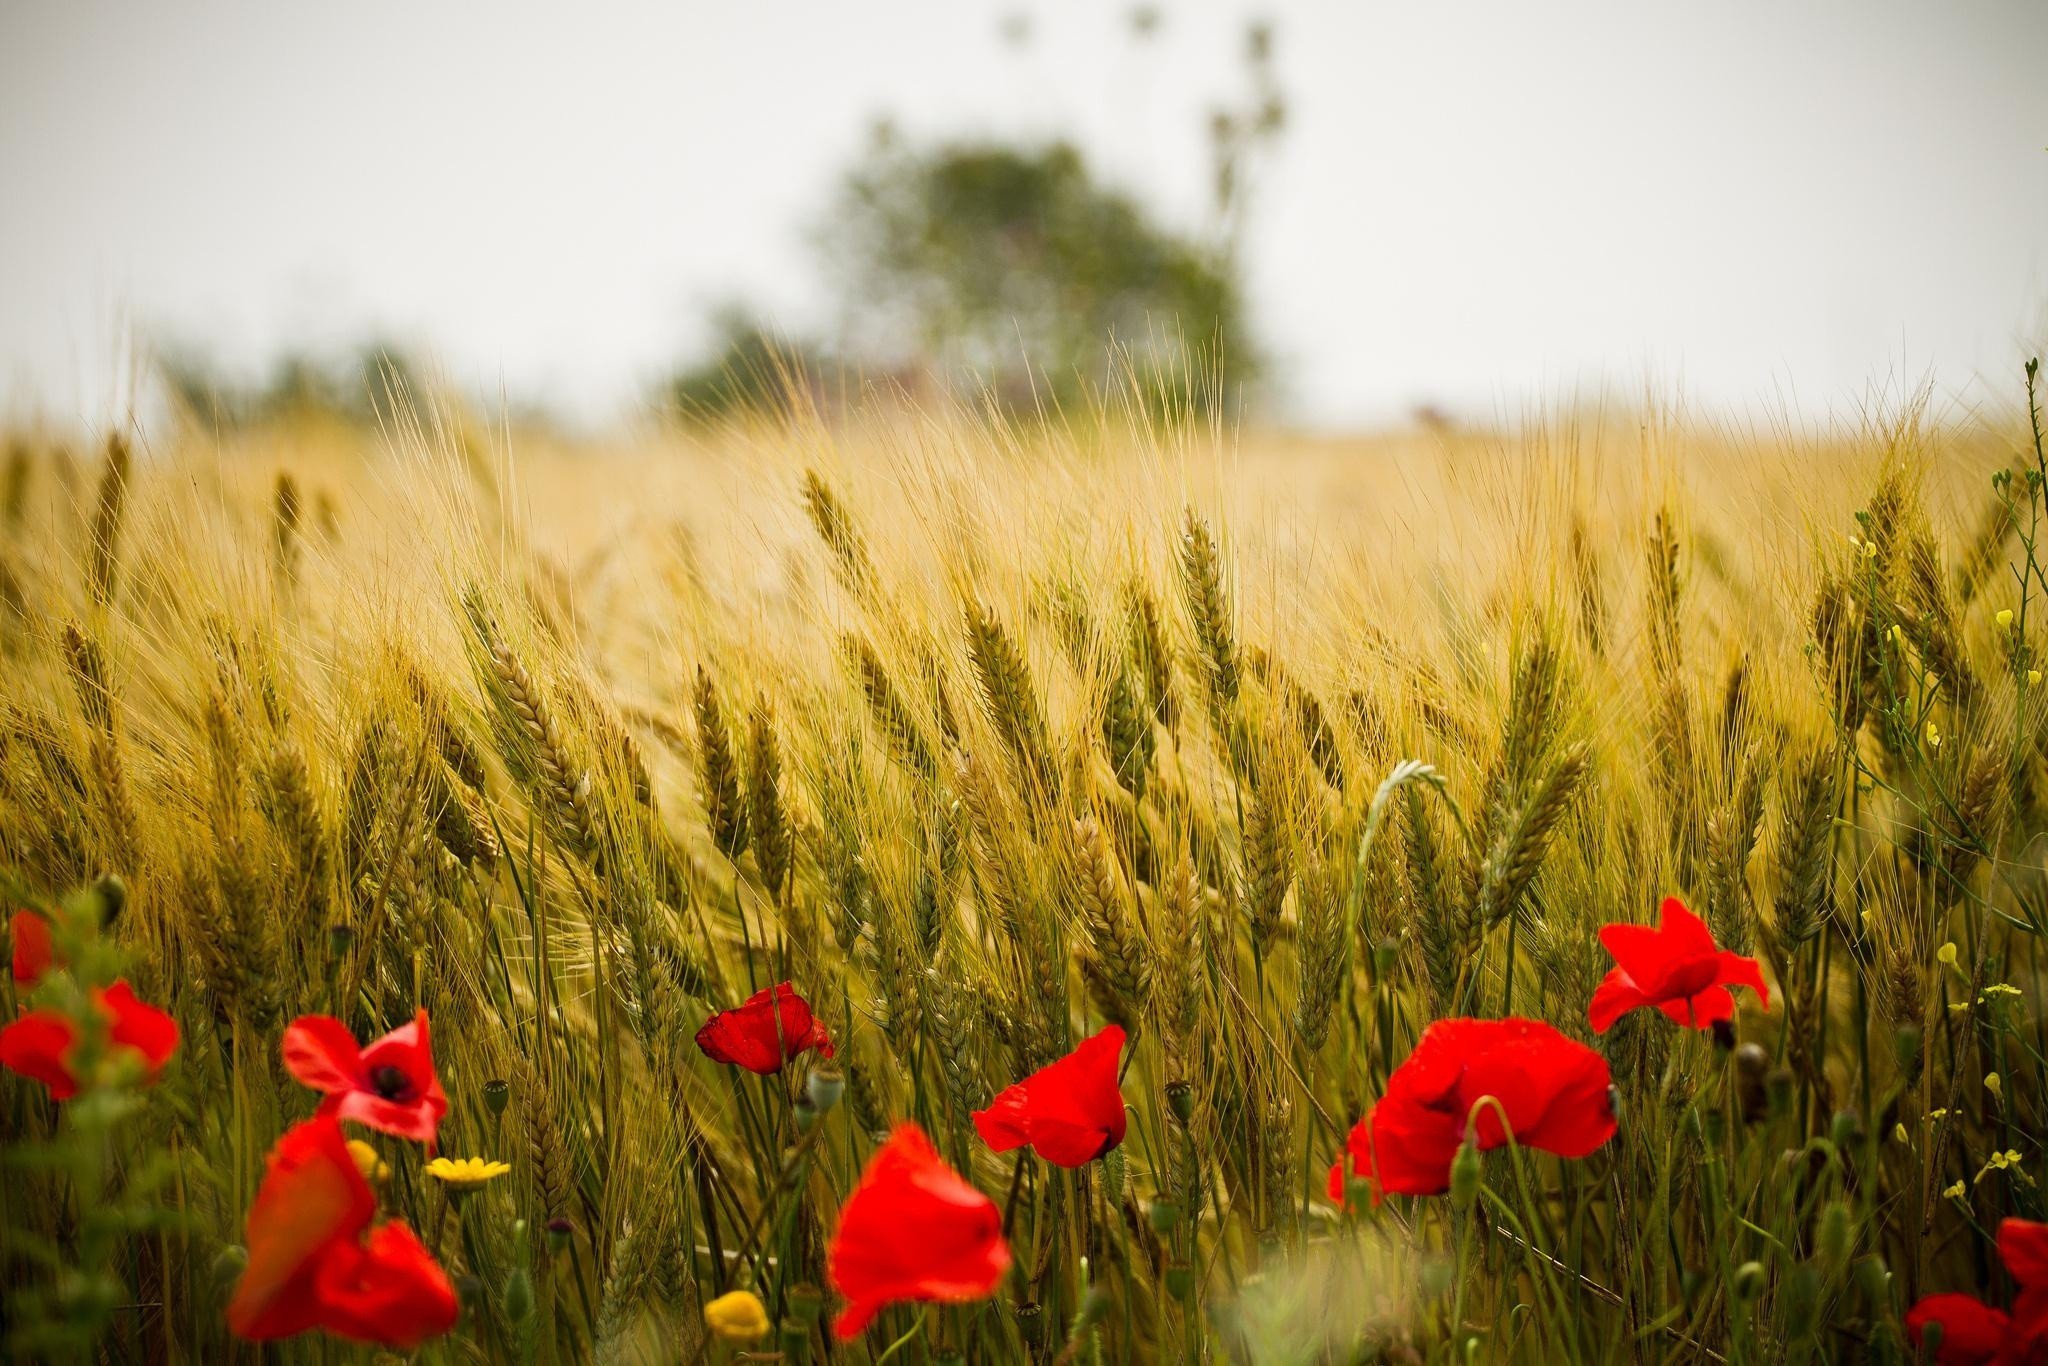 General 2048x1366 nature outdoors wheat plants field flowers red flowers